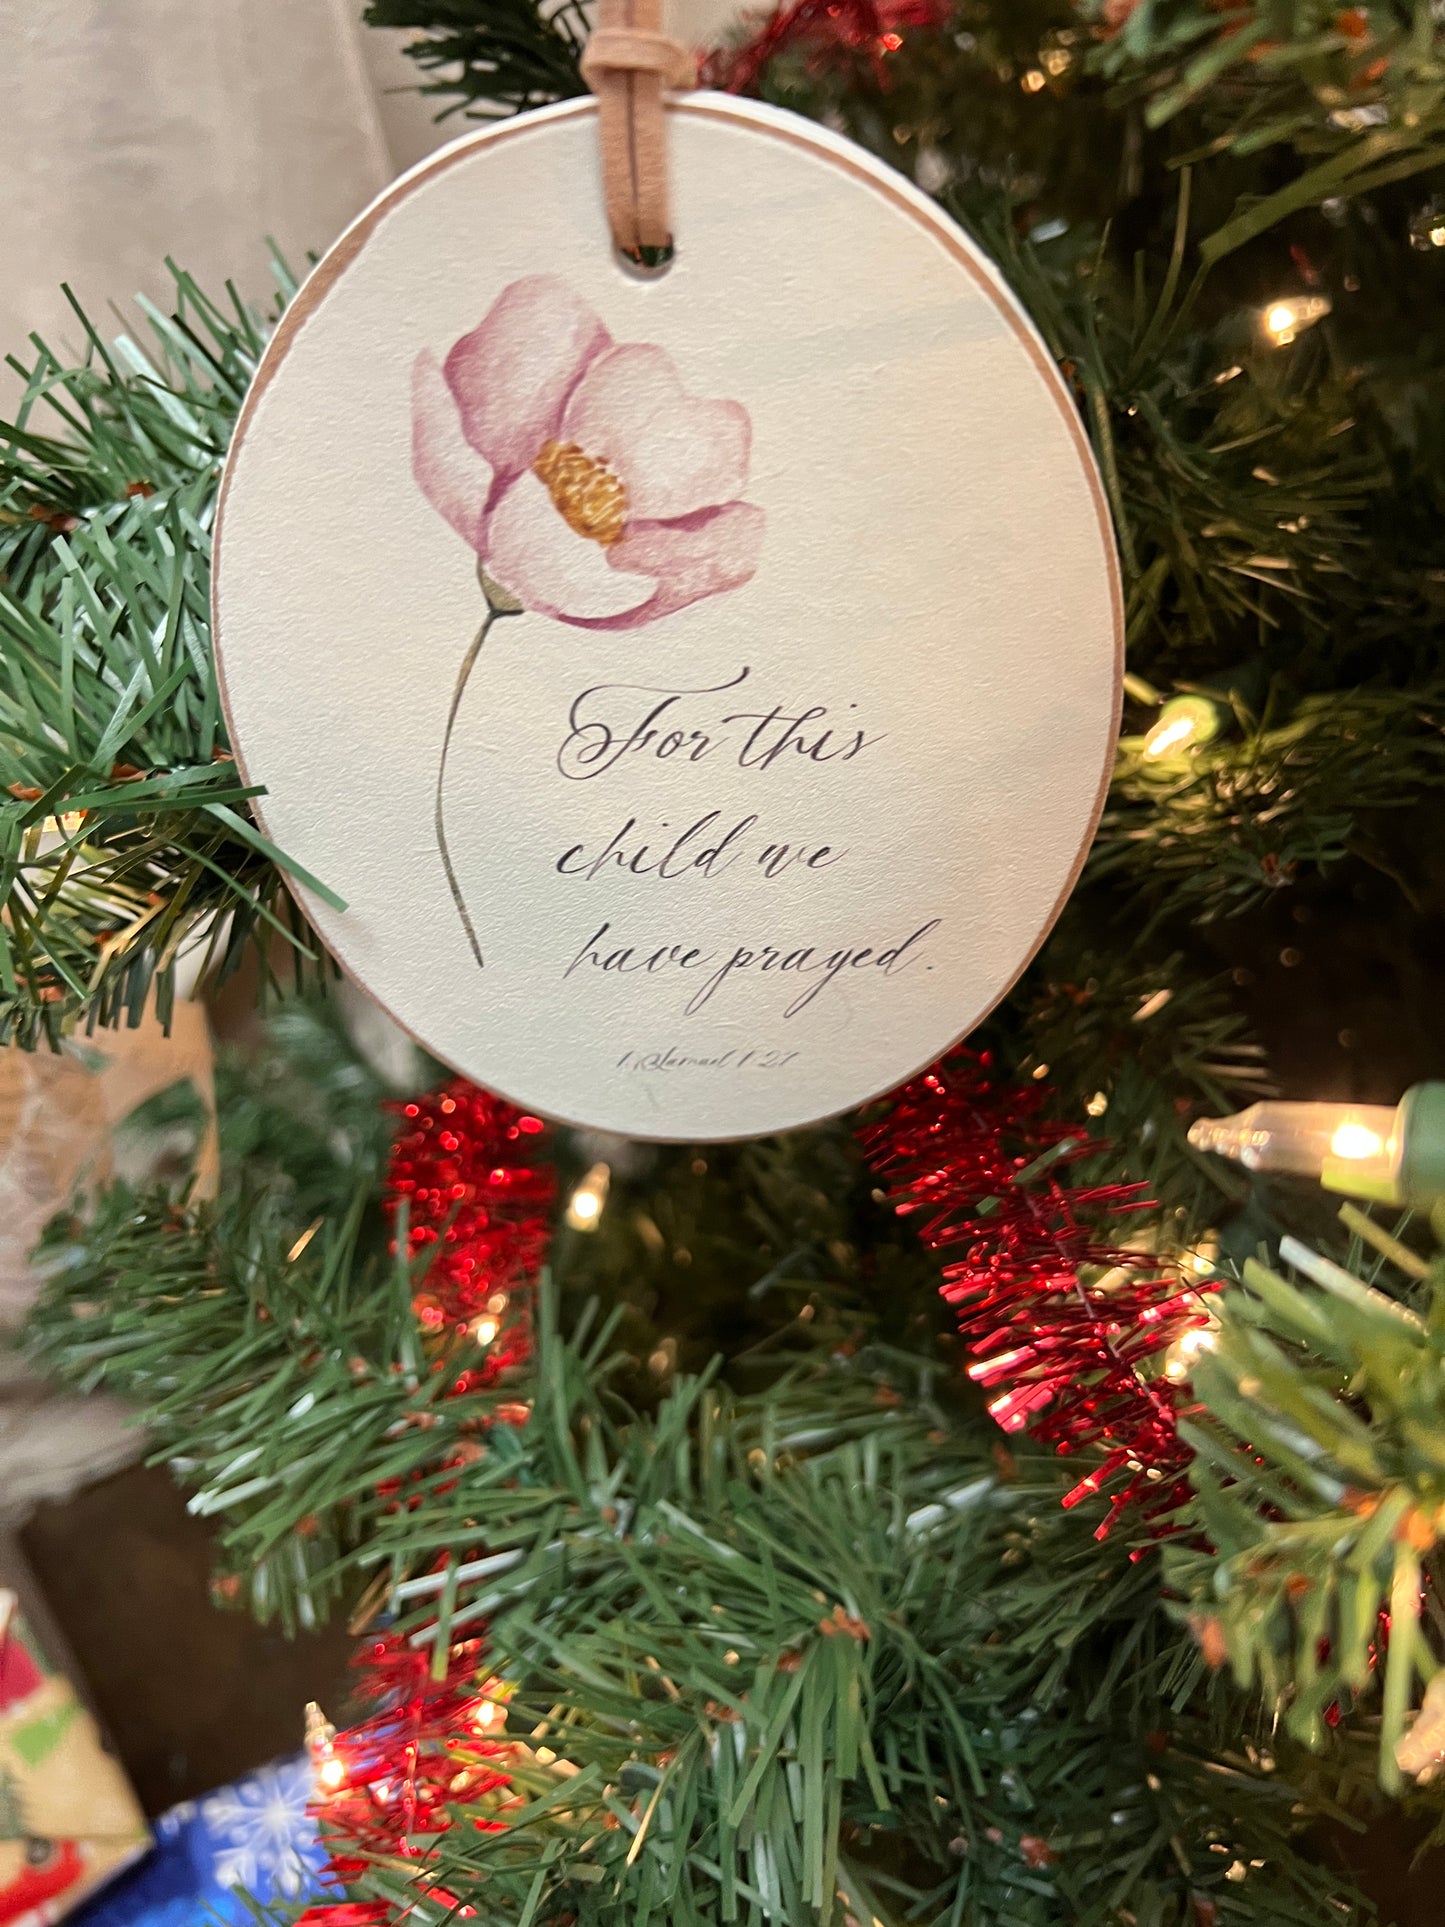 This Child We Prayed Wooden Ornament